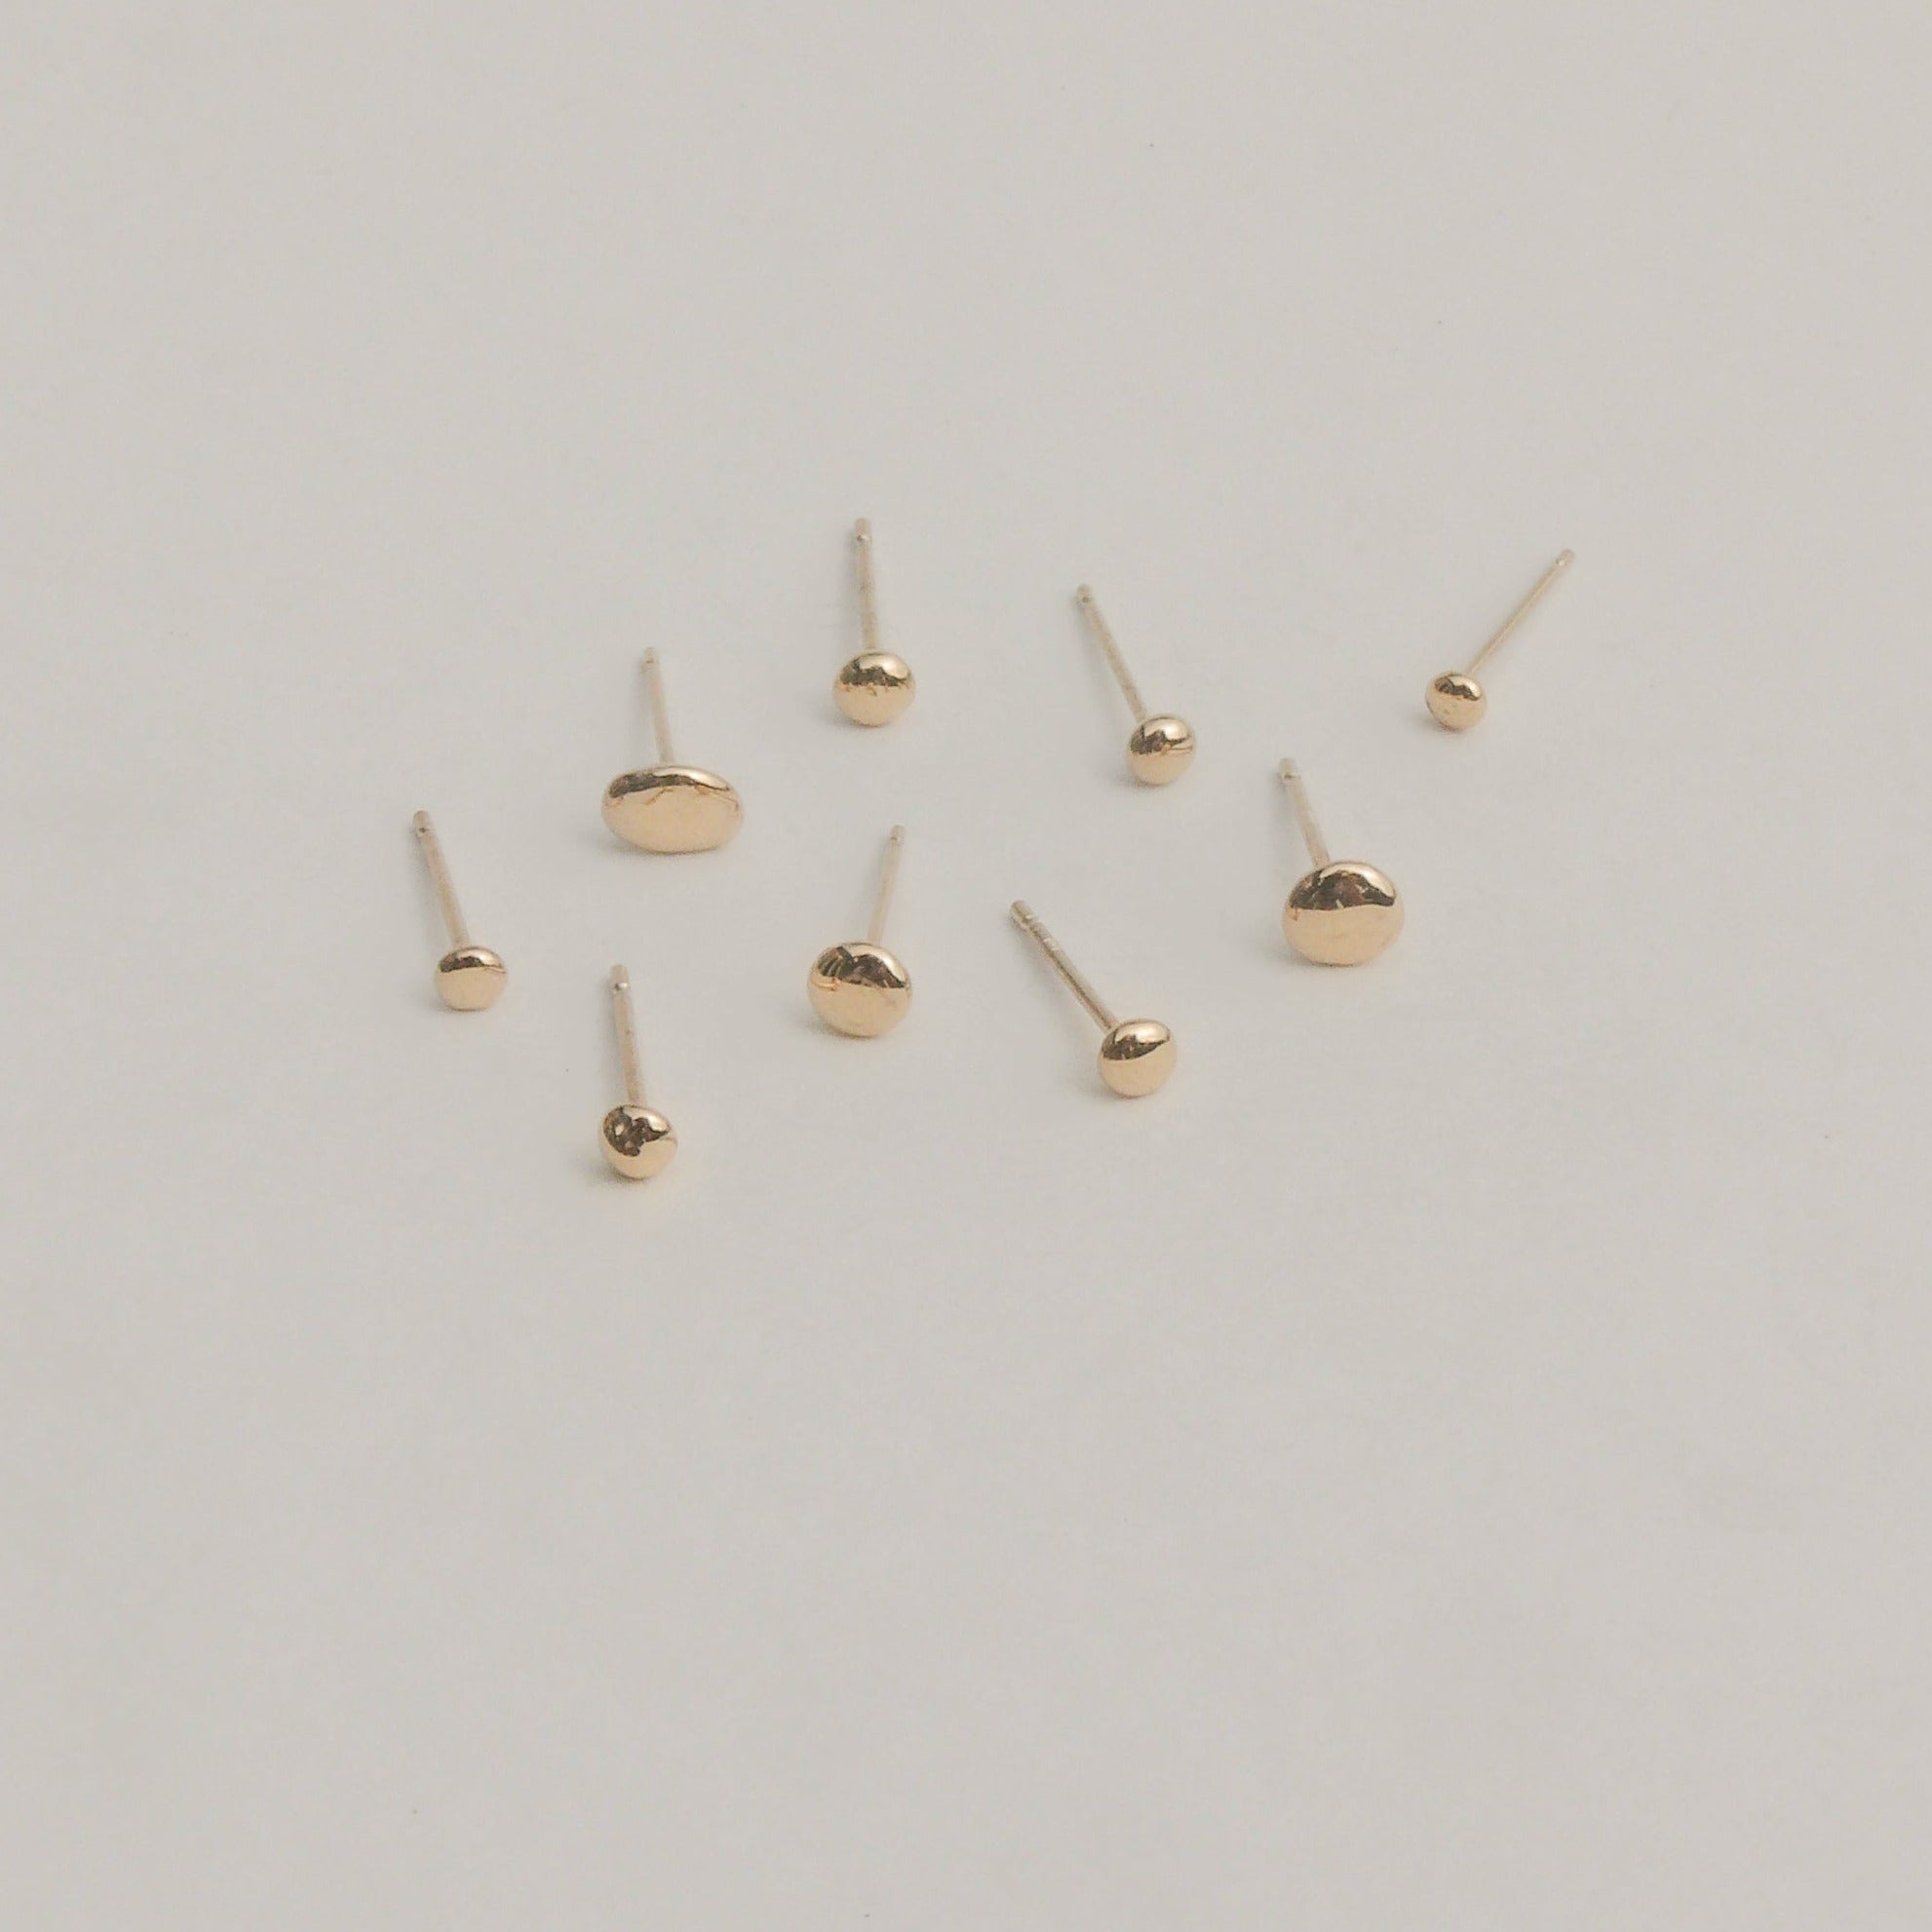 Made Line Jewelry, recycled 14k gold Grain Stud Earrings on white background